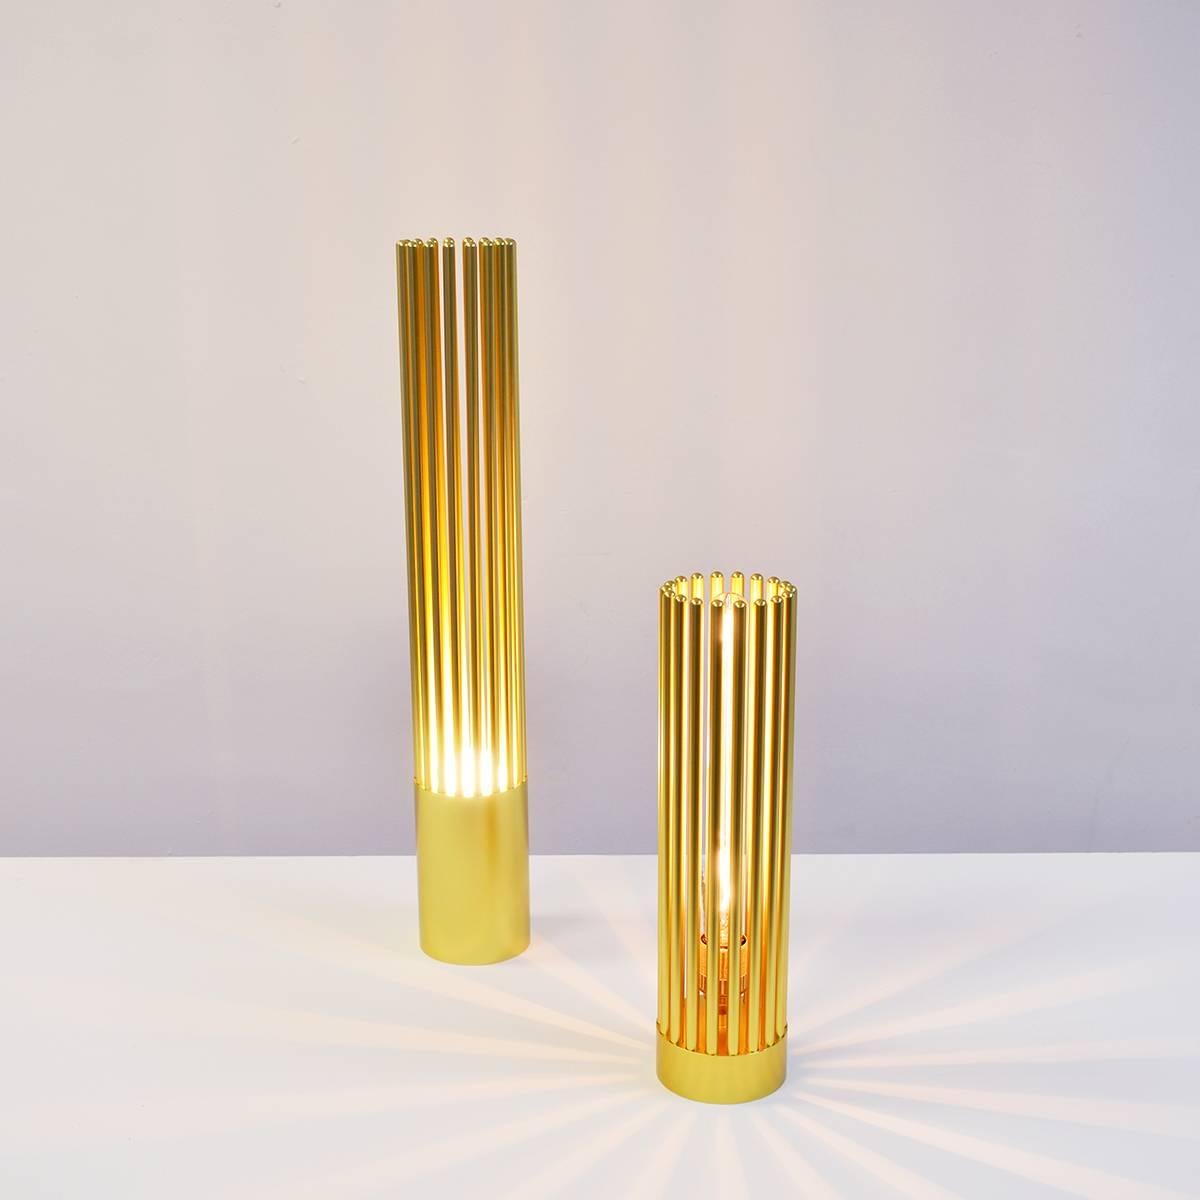 Electra uses a L.E.D golf ball bulb to create a warm uplighter. Electra XL is an opulent desk lamp which references the Art Deco movement with its vertical geometric lines. It combines 26 screw-in arms to create a soft, warm up-glow of light.